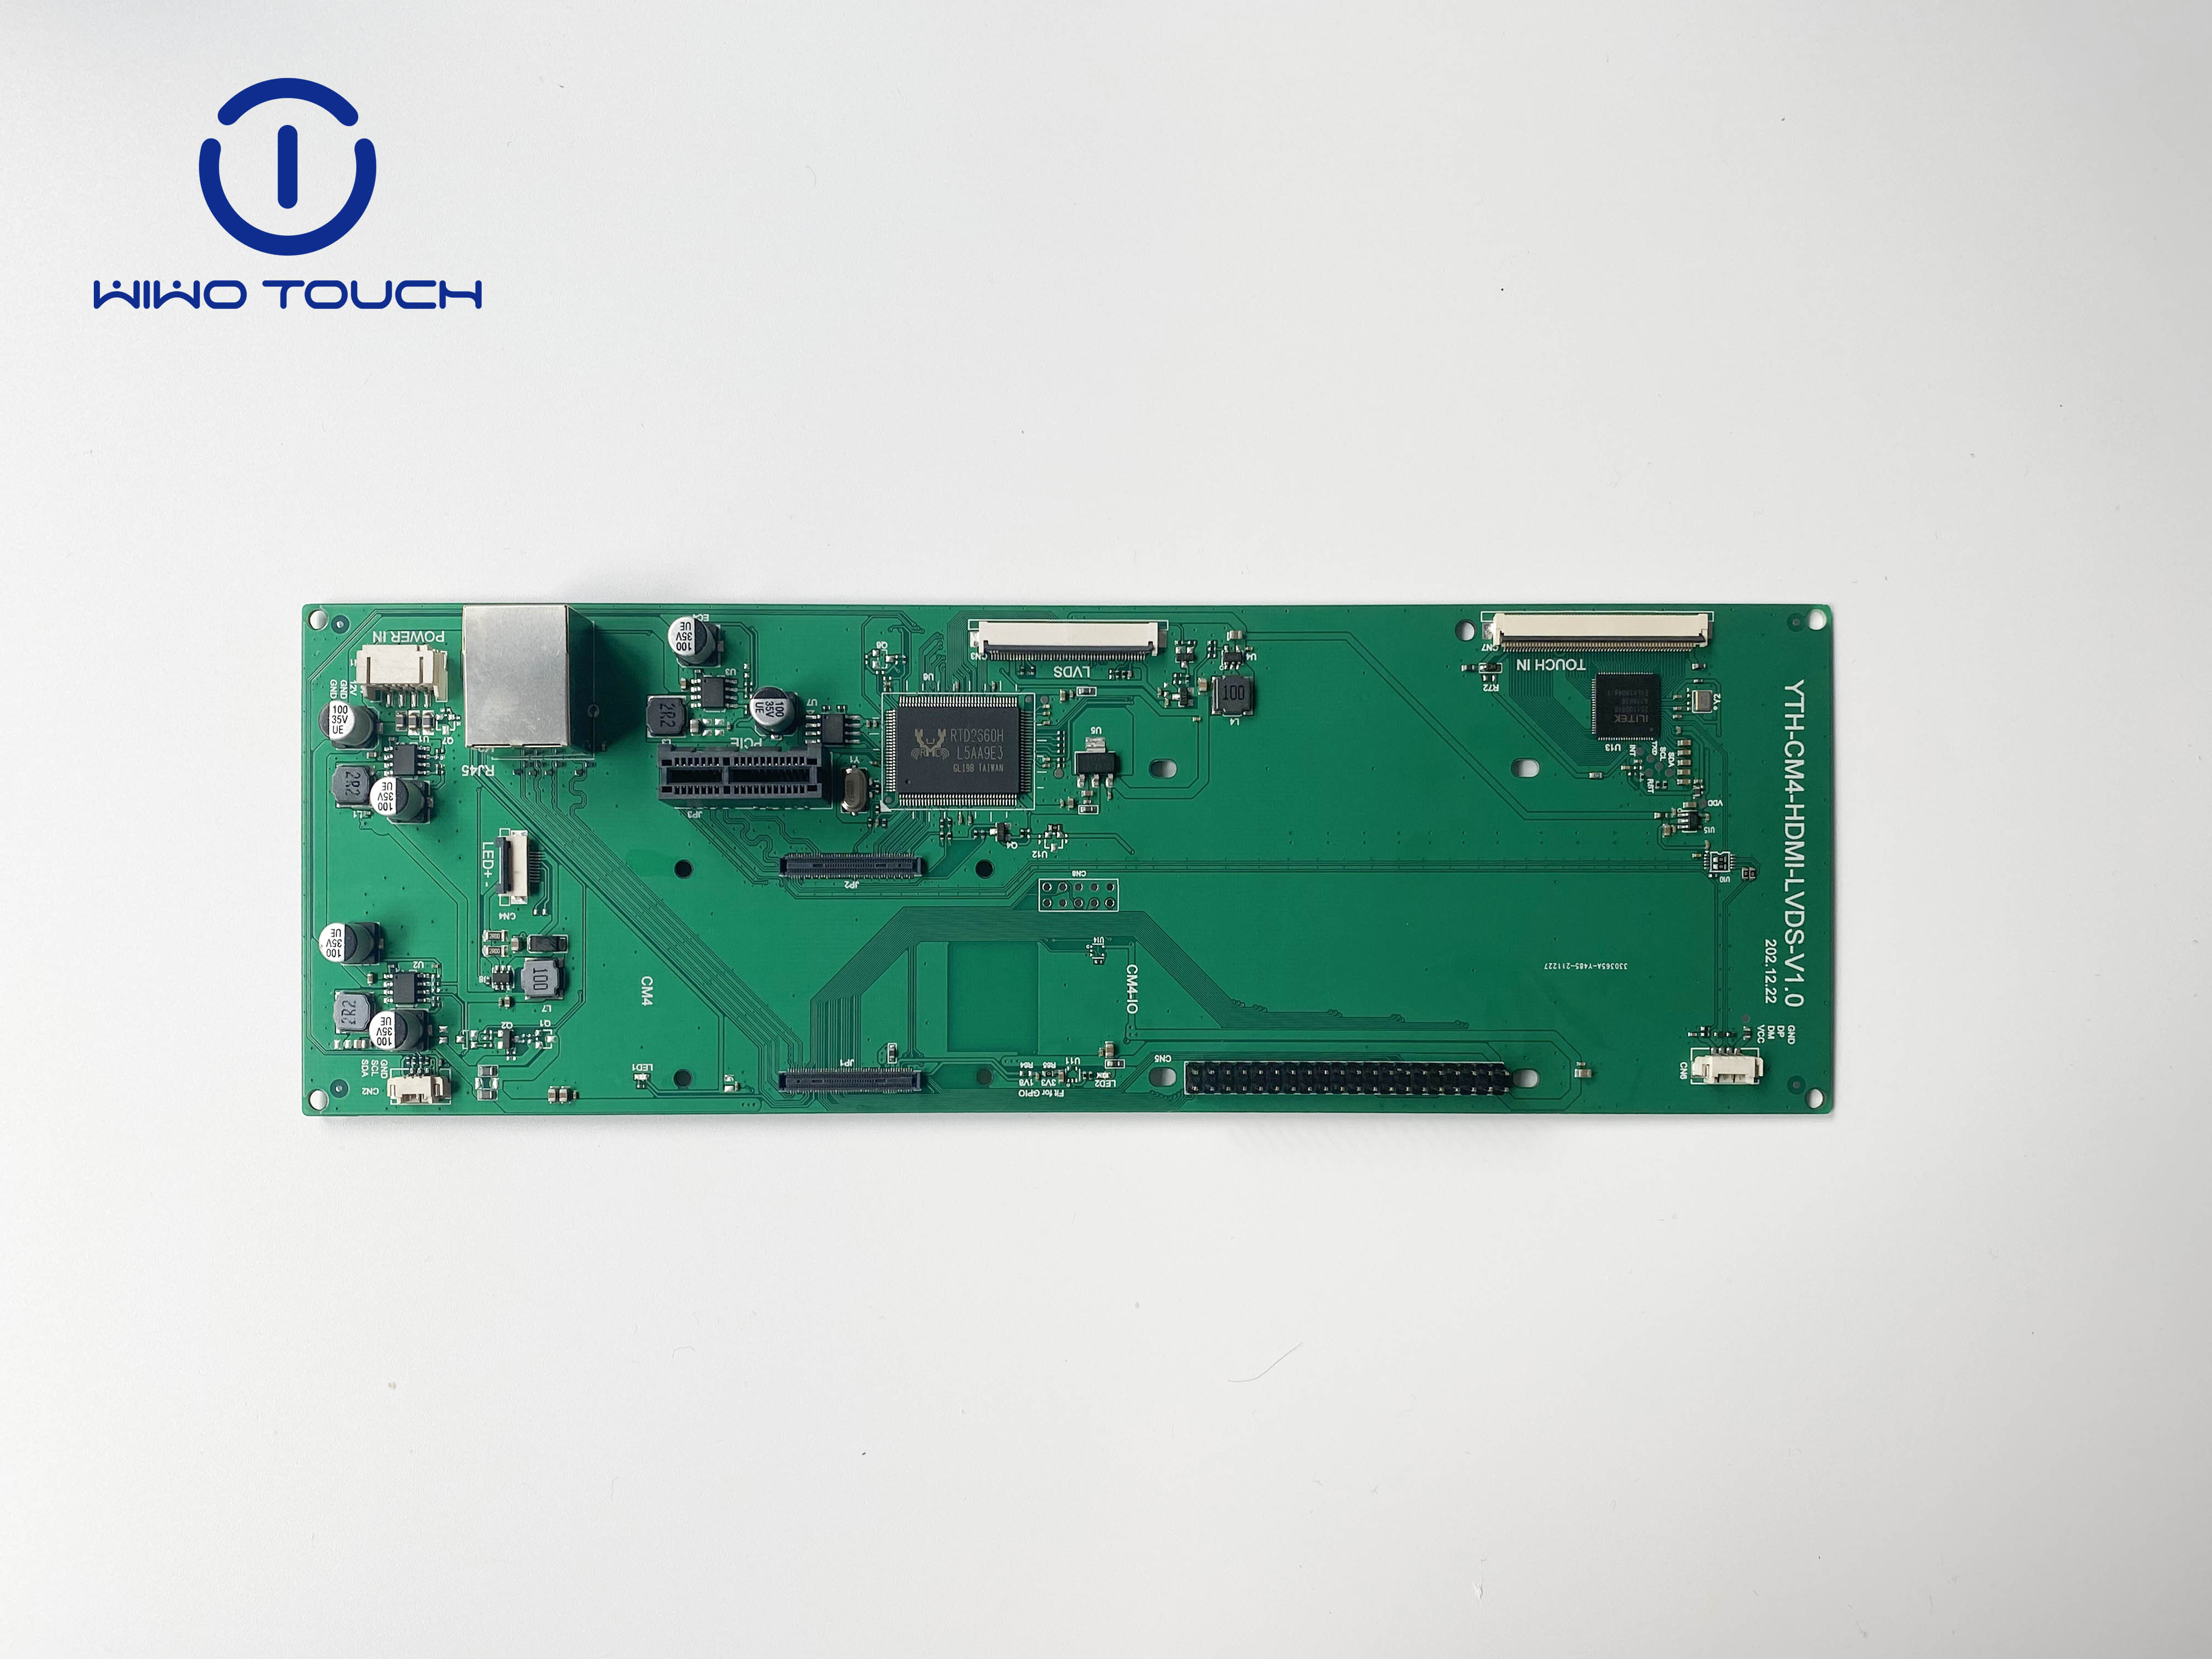 PCB board in electronic devices